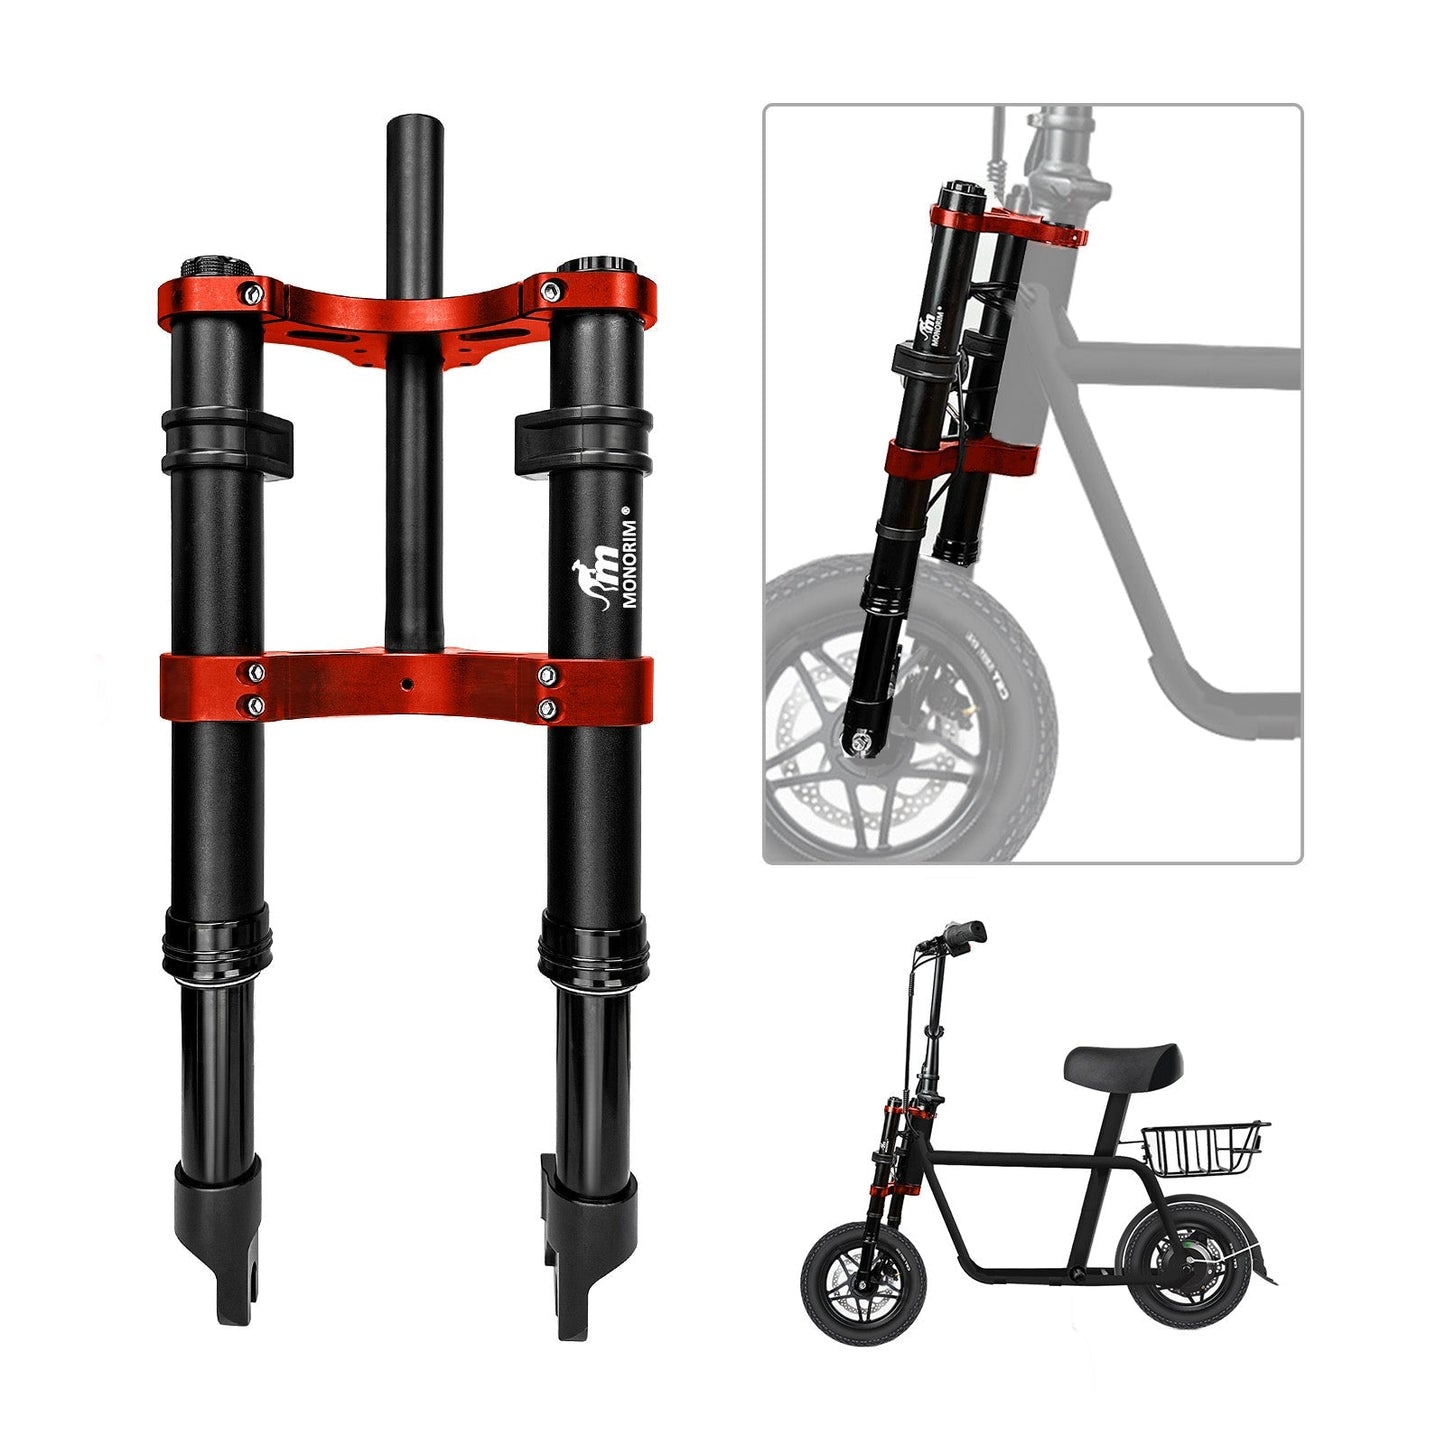 Monorim MB0-12inch front air suspension modify great kit to be more safety and comfort for Engwe T14  ebike